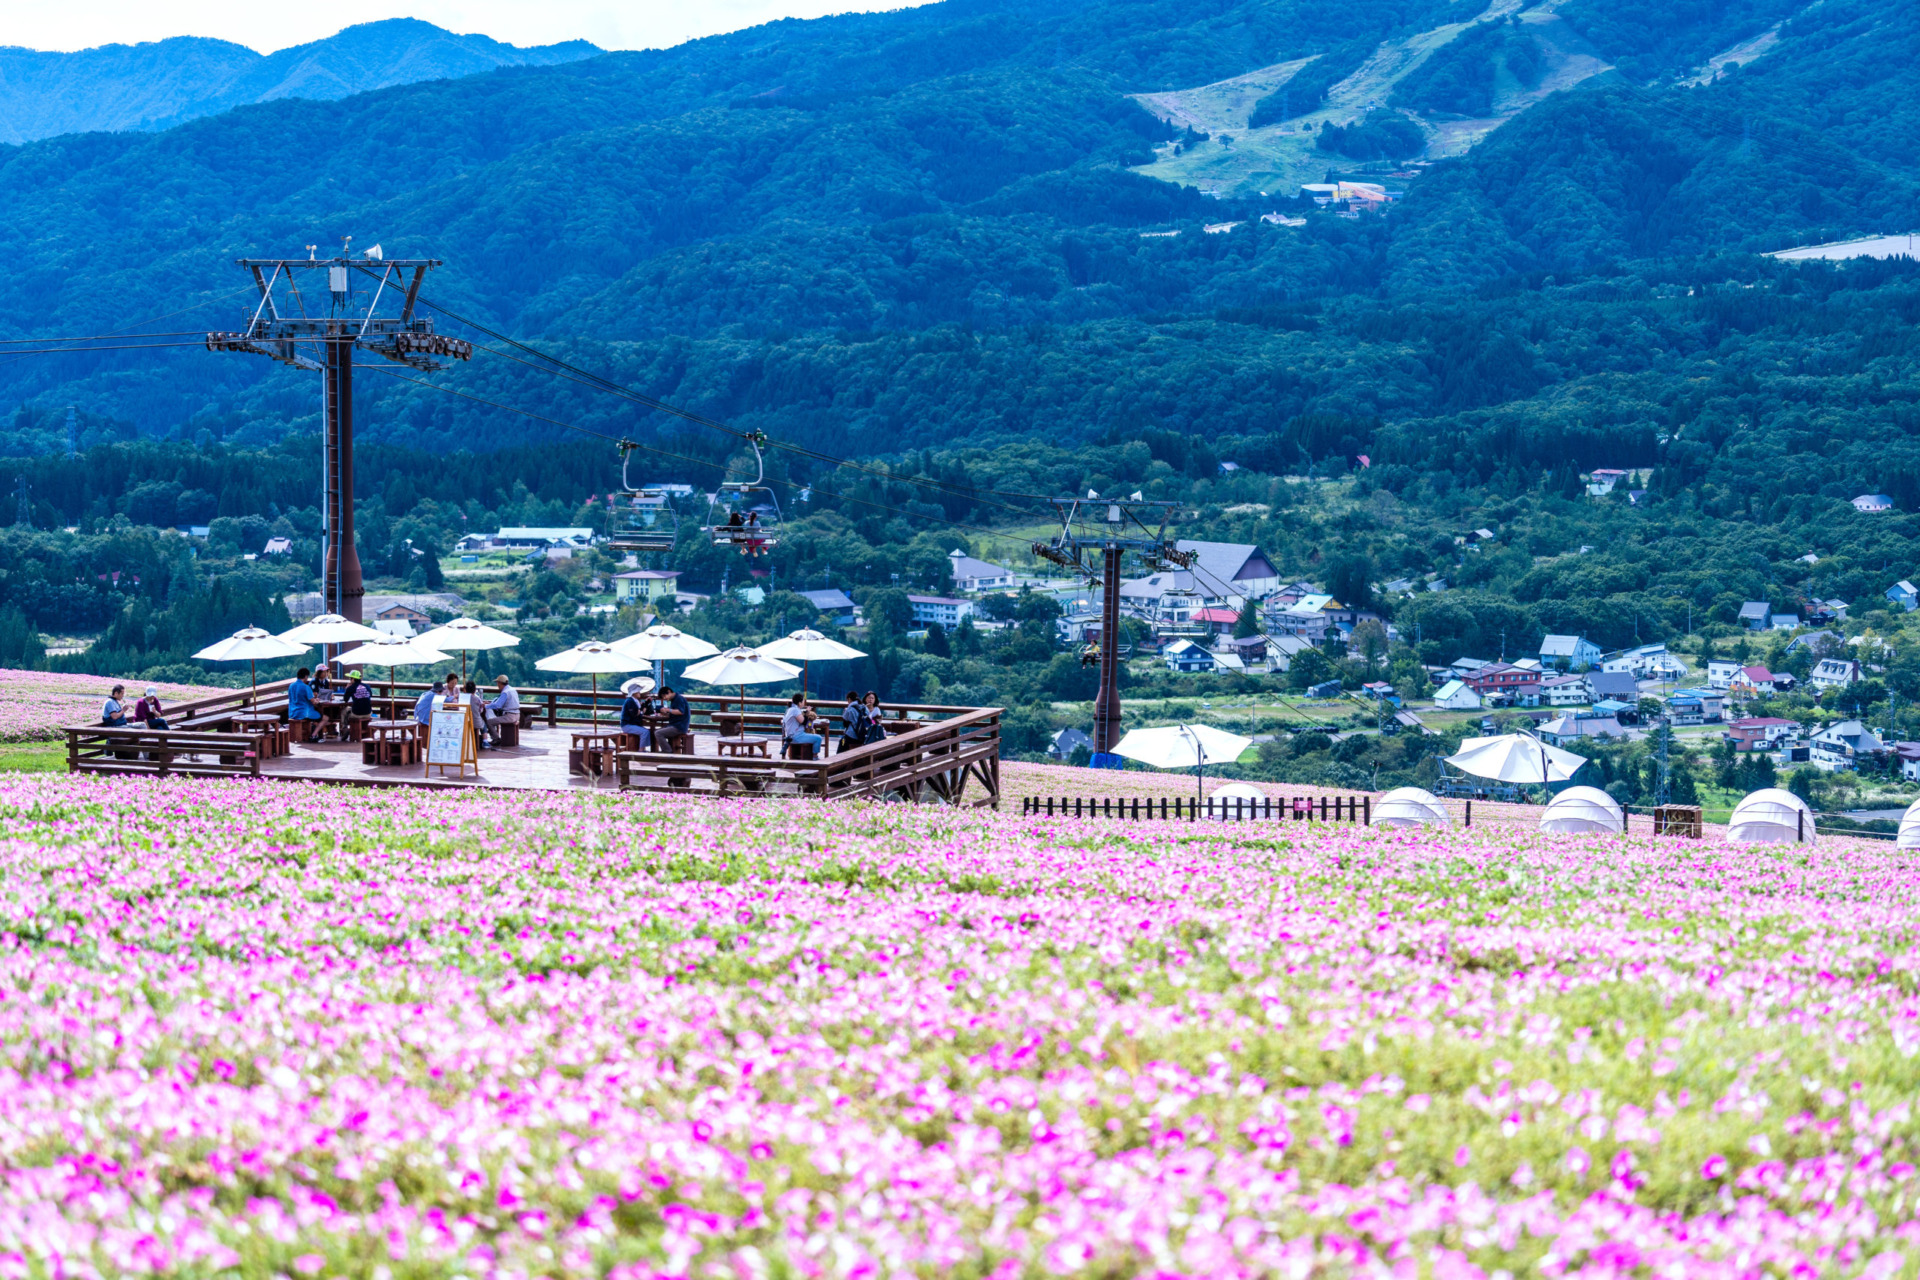 Take a rest and see the largest scale of over 40,000 petunia plants in Japan at Hirugano Picnic Garden. image